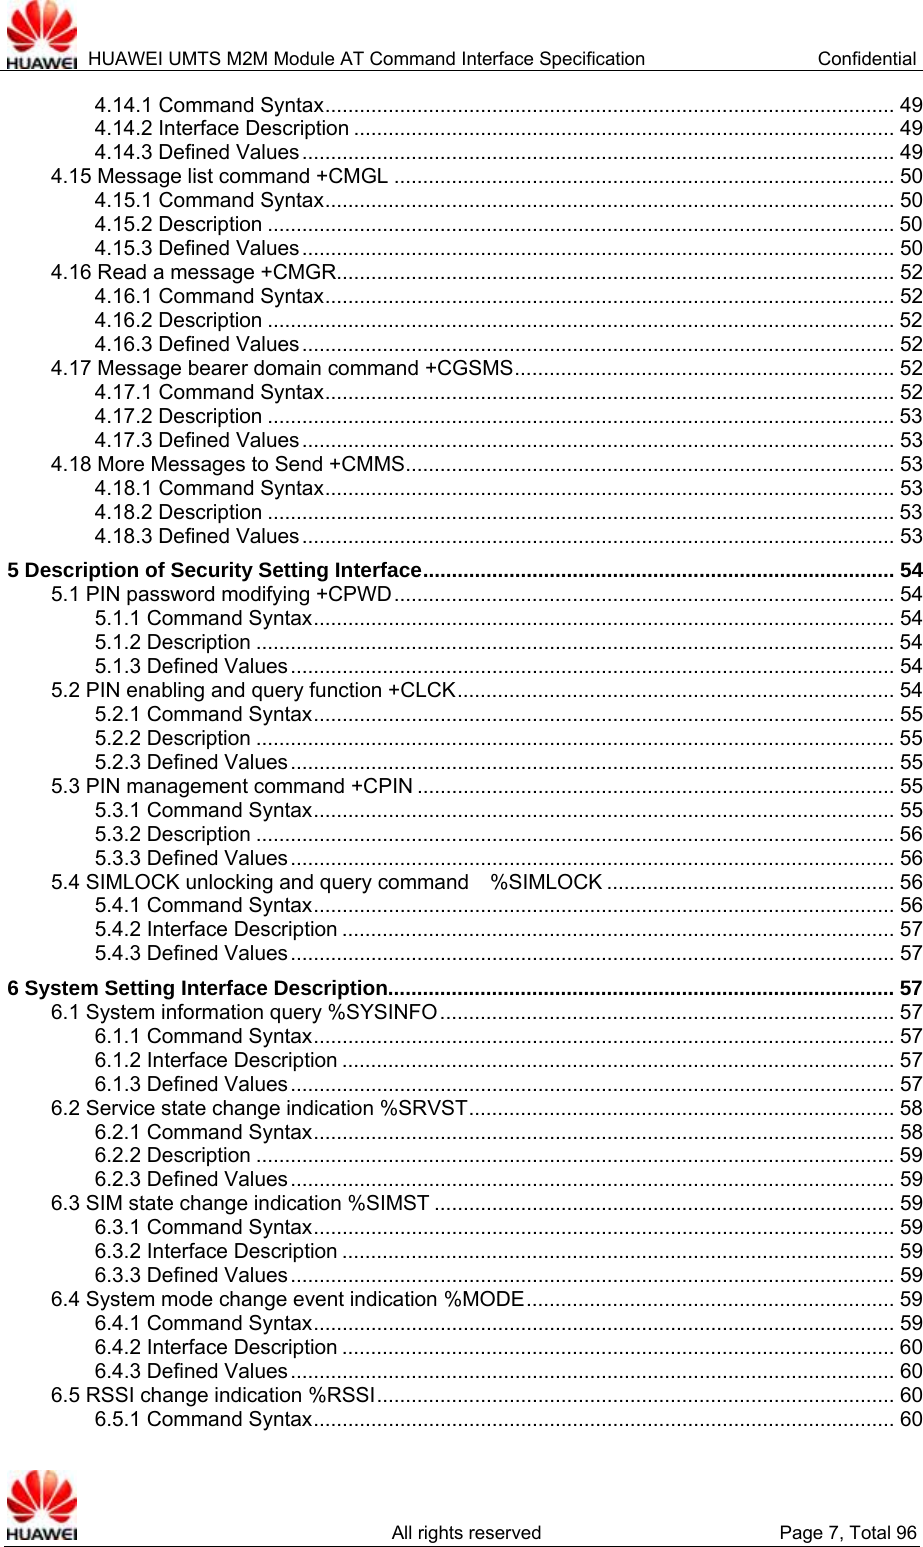  HUAWEI UMTS M2M Module AT Command Interface Specification  Confidential   All rights reserved  Page 7, Total 96 4.14.1 Command Syntax................................................................................................... 49 4.14.2 Interface Description .............................................................................................. 49 4.14.3 Defined Values....................................................................................................... 49 4.15 Message list command +CMGL ....................................................................................... 50 4.15.1 Command Syntax................................................................................................... 50 4.15.2 Description ............................................................................................................. 50 4.15.3 Defined Values....................................................................................................... 50 4.16 Read a message +CMGR................................................................................................. 52 4.16.1 Command Syntax................................................................................................... 52 4.16.2 Description ............................................................................................................. 52 4.16.3 Defined Values....................................................................................................... 52 4.17 Message bearer domain command +CGSMS.................................................................. 52 4.17.1 Command Syntax................................................................................................... 52 4.17.2 Description ............................................................................................................. 53 4.17.3 Defined Values....................................................................................................... 53 4.18 More Messages to Send +CMMS..................................................................................... 53 4.18.1 Command Syntax................................................................................................... 53 4.18.2 Description ............................................................................................................. 53 4.18.3 Defined Values....................................................................................................... 53 5 Description of Security Setting Interface.................................................................................. 54 5.1 PIN password modifying +CPWD....................................................................................... 54 5.1.1 Command Syntax..................................................................................................... 54 5.1.2 Description ...............................................................................................................54 5.1.3 Defined Values......................................................................................................... 54 5.2 PIN enabling and query function +CLCK............................................................................ 54 5.2.1 Command Syntax..................................................................................................... 55 5.2.2 Description ...............................................................................................................55 5.2.3 Defined Values......................................................................................................... 55 5.3 PIN management command +CPIN ................................................................................... 55 5.3.1 Command Syntax..................................................................................................... 55 5.3.2 Description ...............................................................................................................56 5.3.3 Defined Values......................................................................................................... 56 5.4 SIMLOCK unlocking and query command    %SIMLOCK .................................................. 56 5.4.1 Command Syntax..................................................................................................... 56 5.4.2 Interface Description ................................................................................................ 57 5.4.3 Defined Values......................................................................................................... 57 6 System Setting Interface Description........................................................................................ 57 6.1 System information query %SYSINFO............................................................................... 57 6.1.1 Command Syntax..................................................................................................... 57 6.1.2 Interface Description ................................................................................................ 57 6.1.3 Defined Values......................................................................................................... 57 6.2 Service state change indication %SRVST.......................................................................... 58 6.2.1 Command Syntax..................................................................................................... 58 6.2.2 Description ...............................................................................................................59 6.2.3 Defined Values......................................................................................................... 59 6.3 SIM state change indication %SIMST ................................................................................ 59 6.3.1 Command Syntax..................................................................................................... 59 6.3.2 Interface Description ................................................................................................ 59 6.3.3 Defined Values......................................................................................................... 59 6.4 System mode change event indication %MODE................................................................ 59 6.4.1 Command Syntax..................................................................................................... 59 6.4.2 Interface Description ................................................................................................ 60 6.4.3 Defined Values......................................................................................................... 60 6.5 RSSI change indication %RSSI.......................................................................................... 60 6.5.1 Command Syntax..................................................................................................... 60 